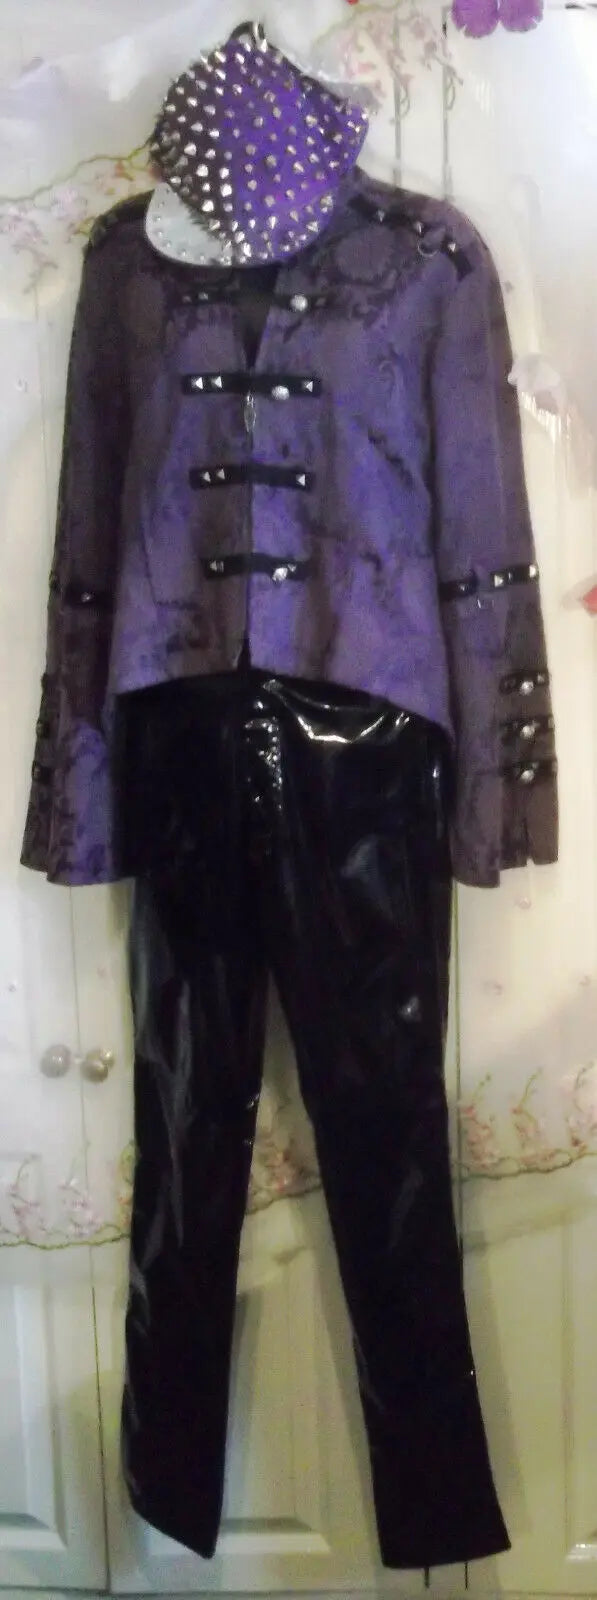 new without tags.punk/goth living dead soul purple jacket with studs accents Living Dead Souls